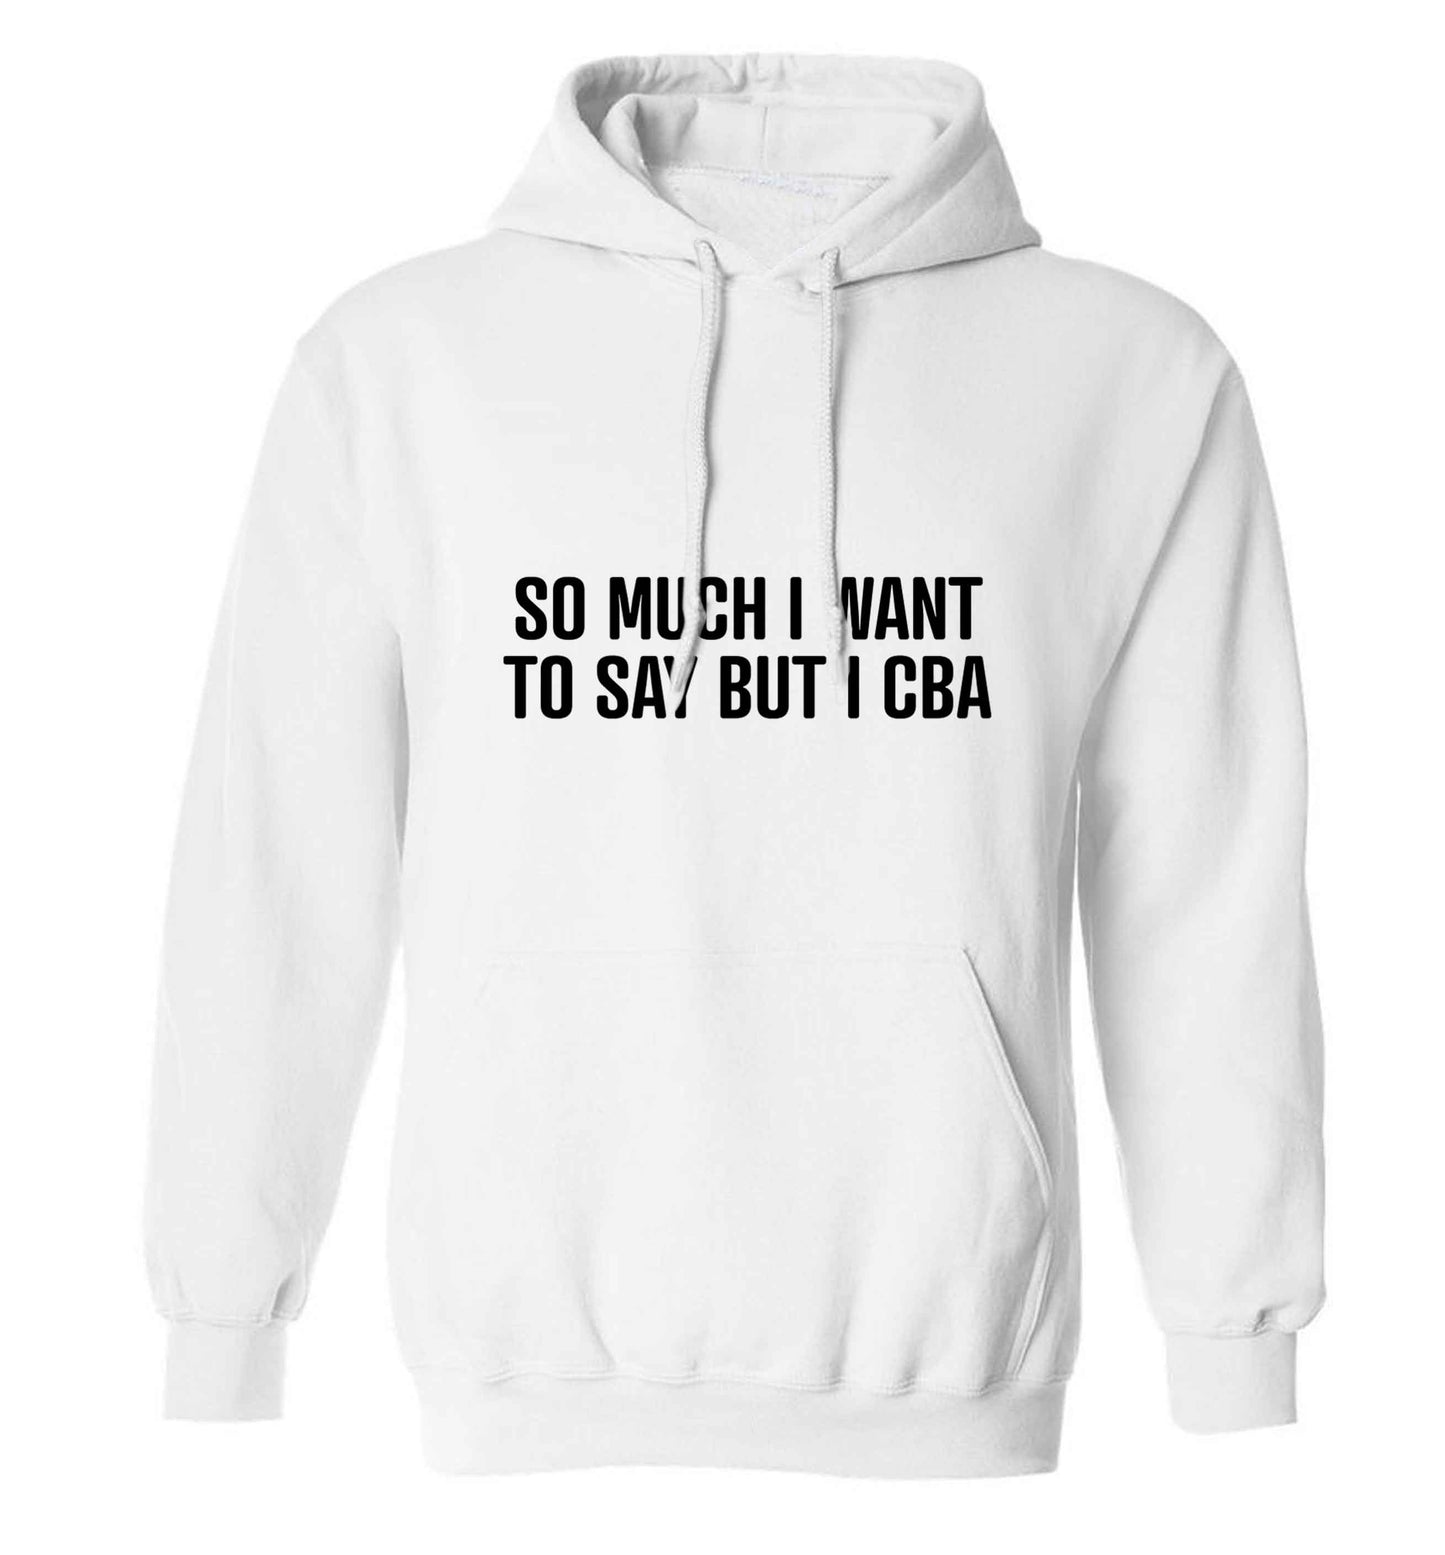 So much I want to say I cba  adults unisex white hoodie 2XL